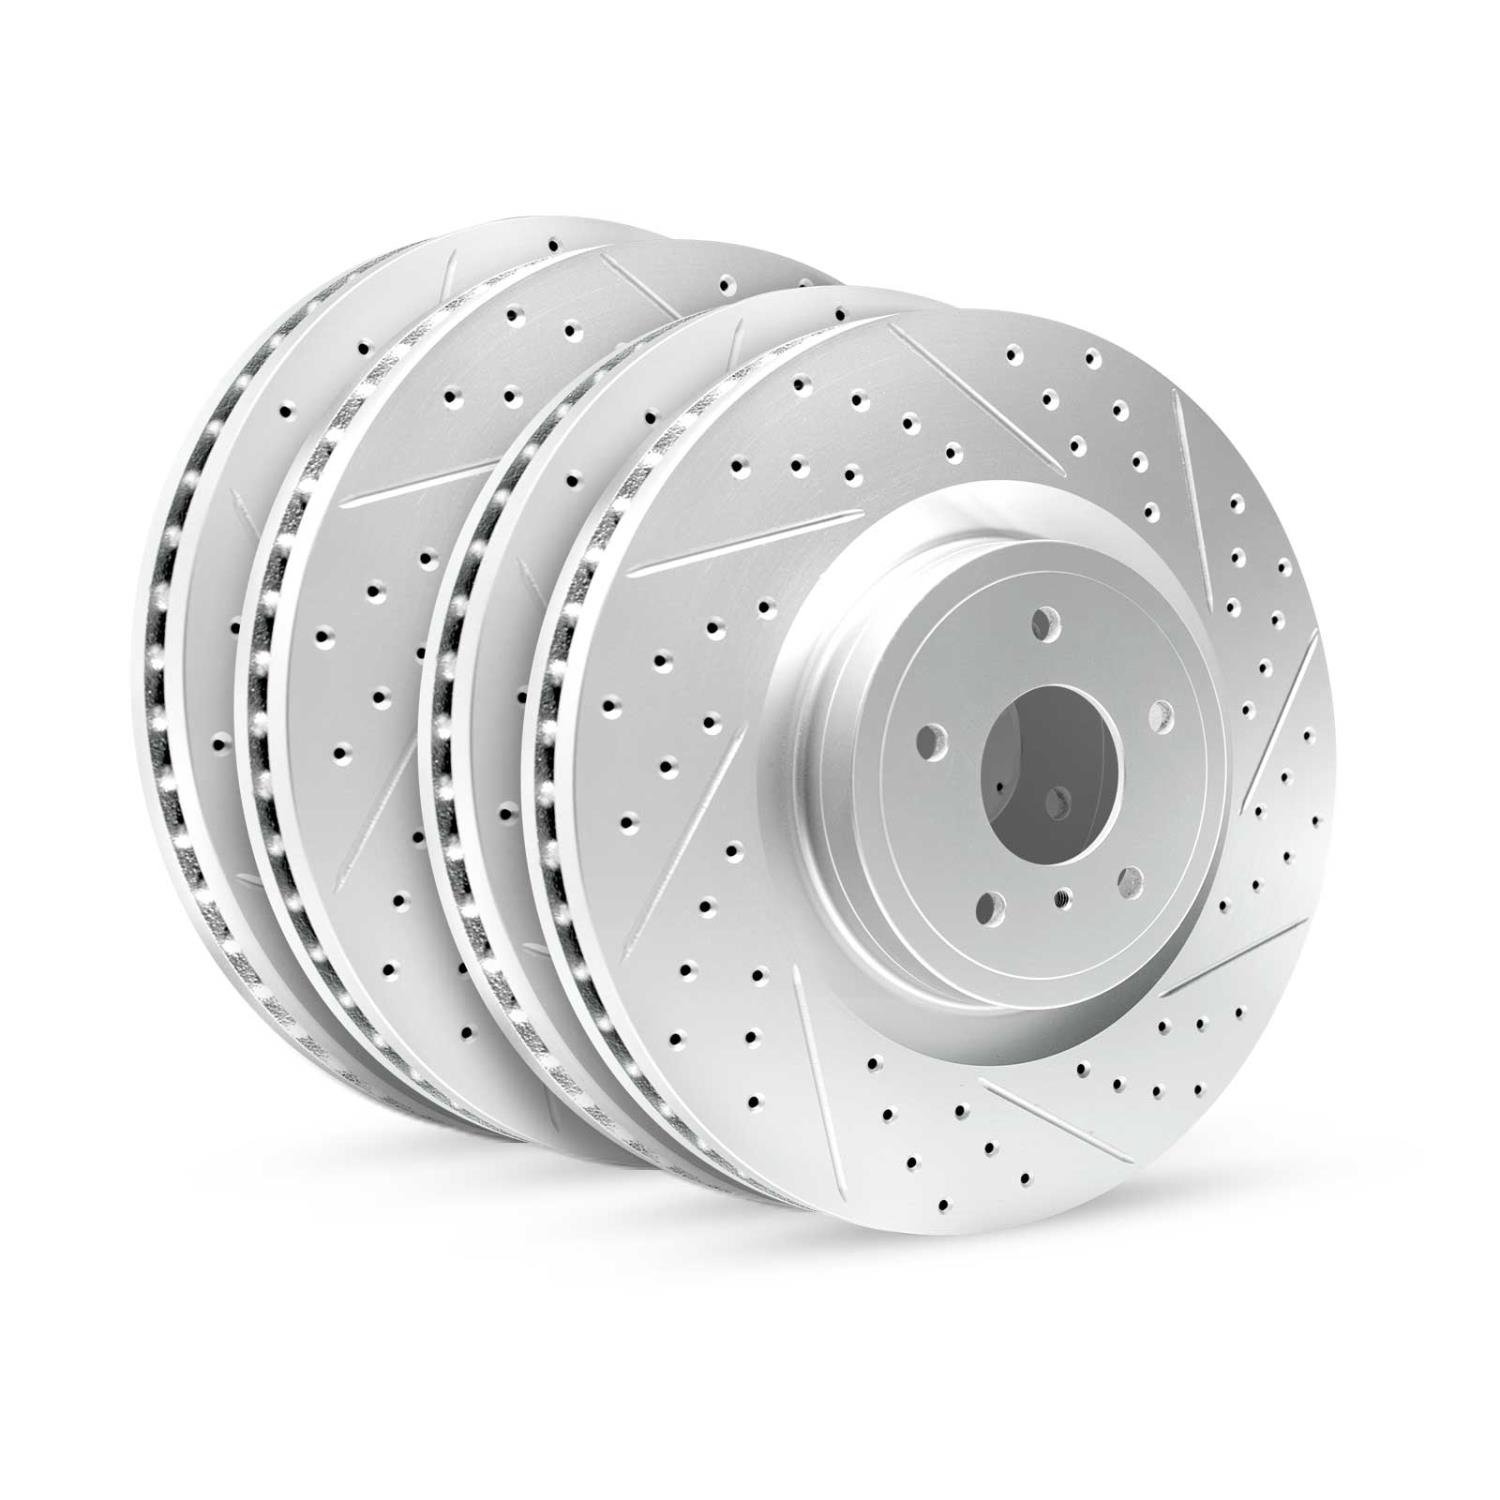 GEO-Carbon Drilled/Slotted Rotors, 2001-2008 Fits Multiple Makes/Models, Position: Front/Rear